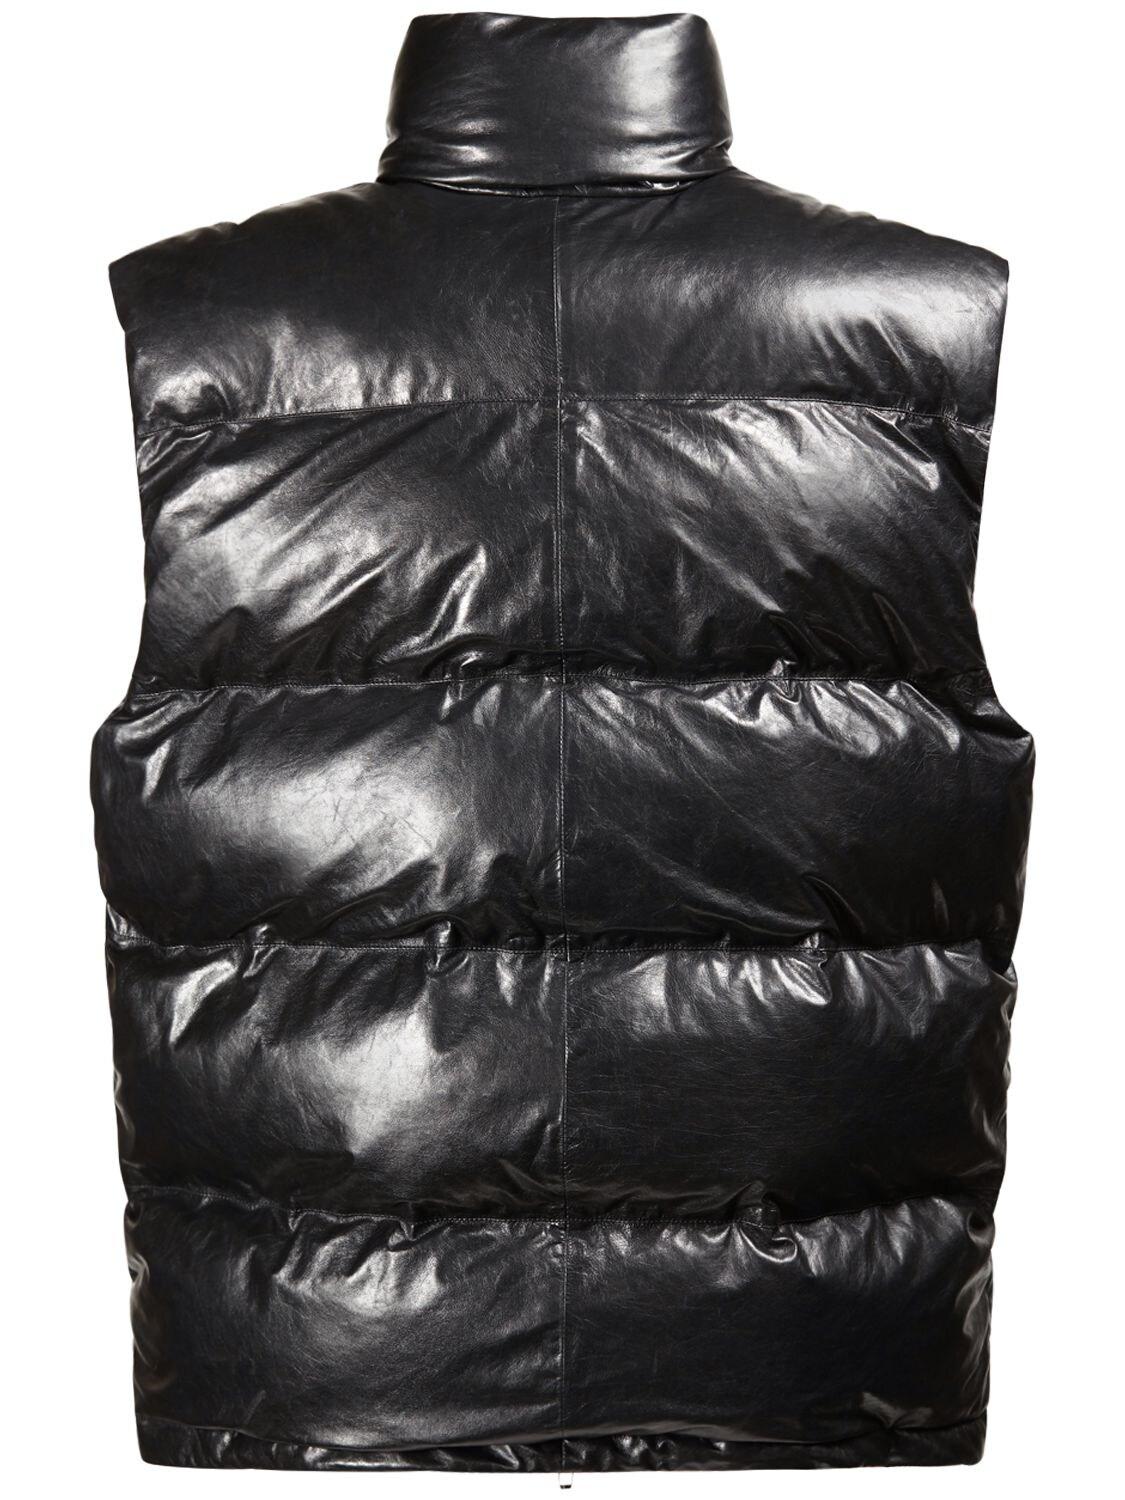 Balenciaga Leather Puffer Vest in Black for Men | Lyst